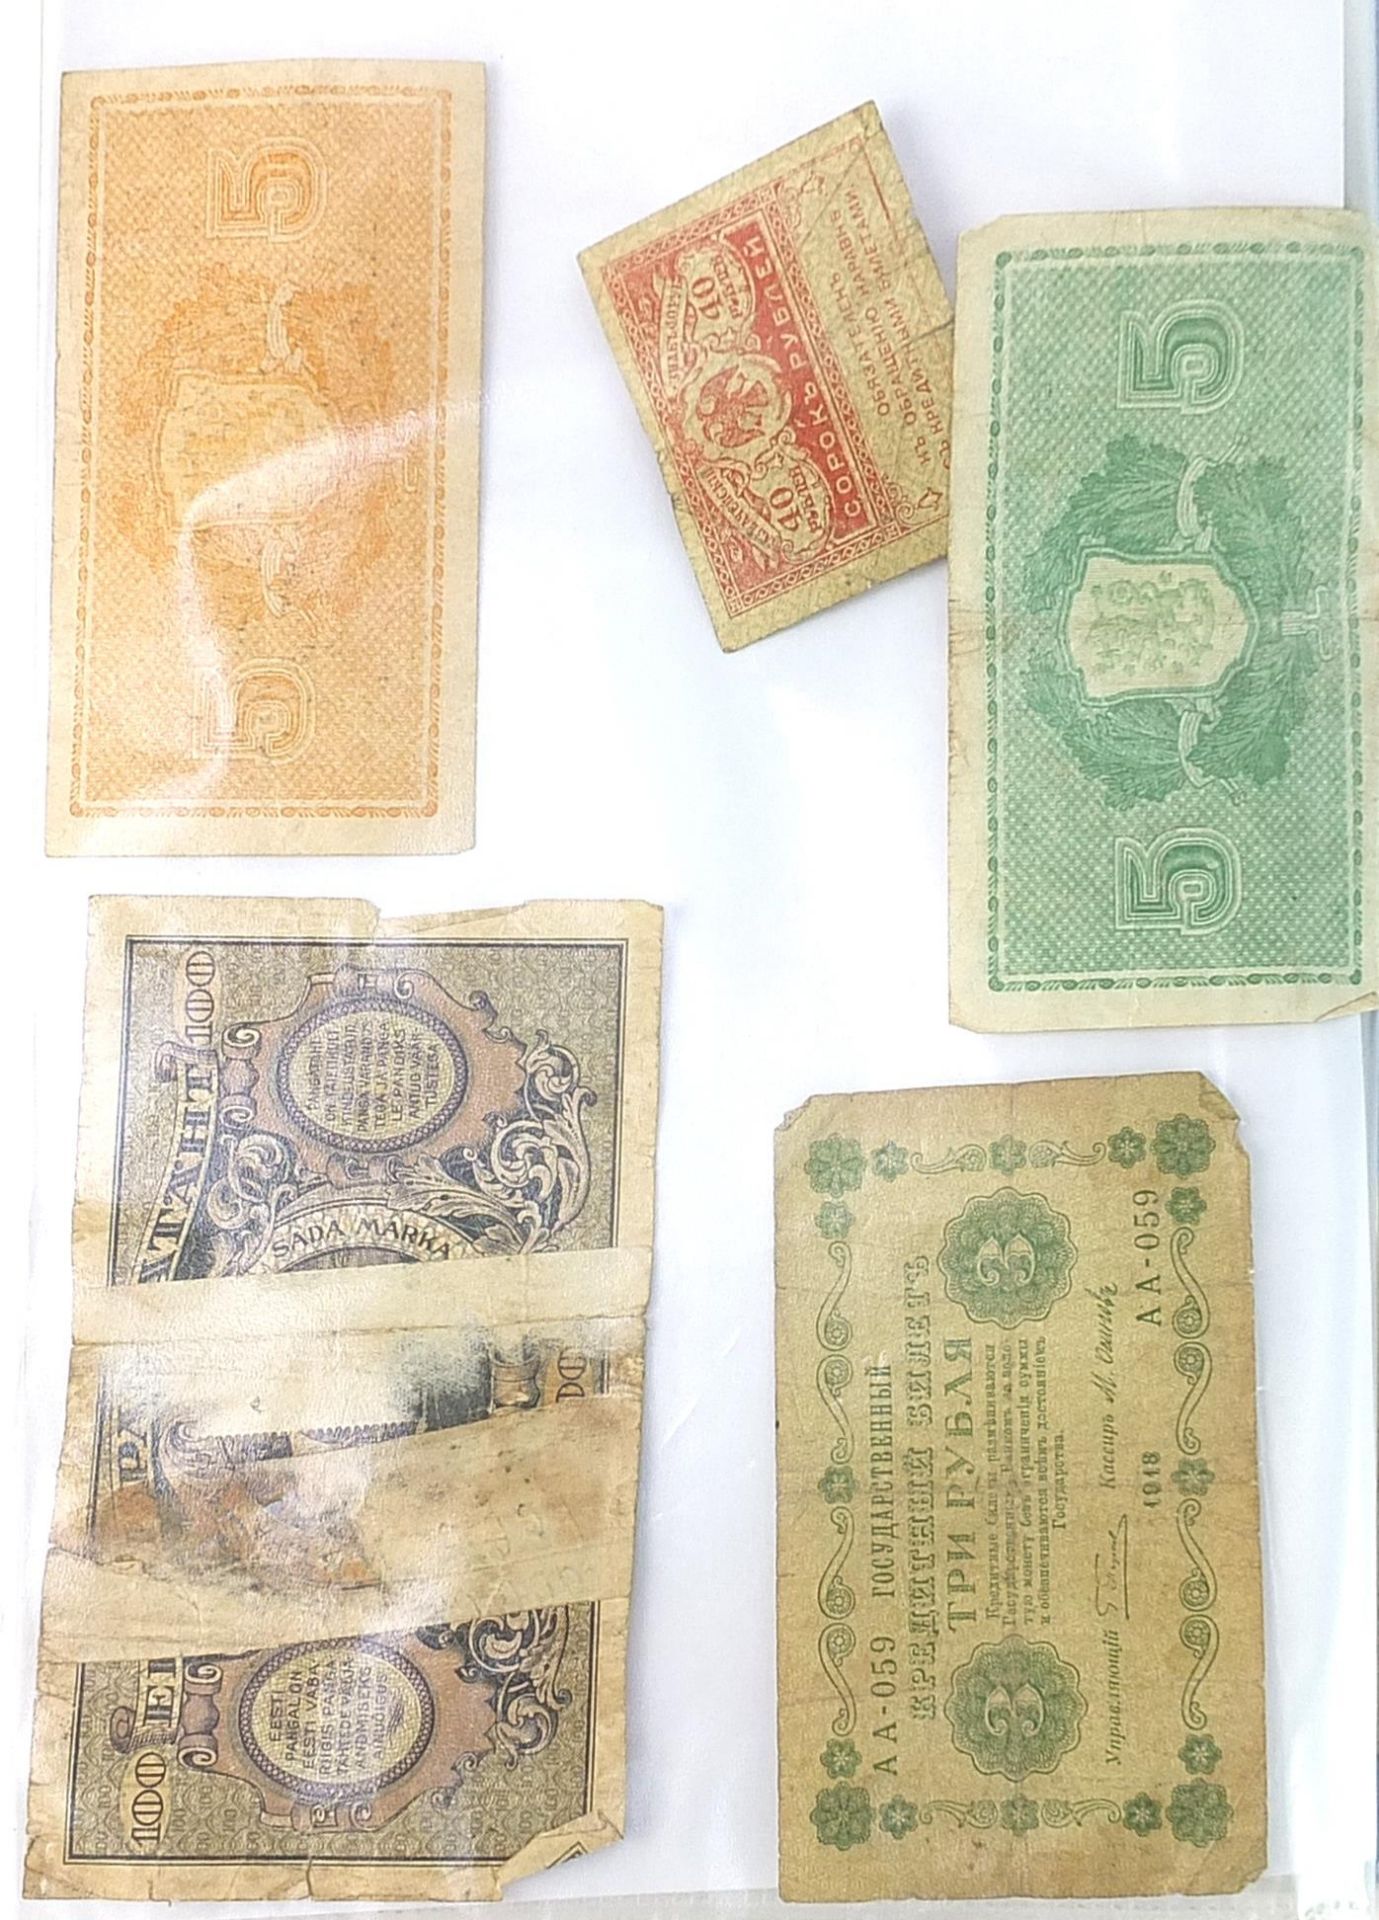 World banknotes including German and Russian examples - Image 10 of 16